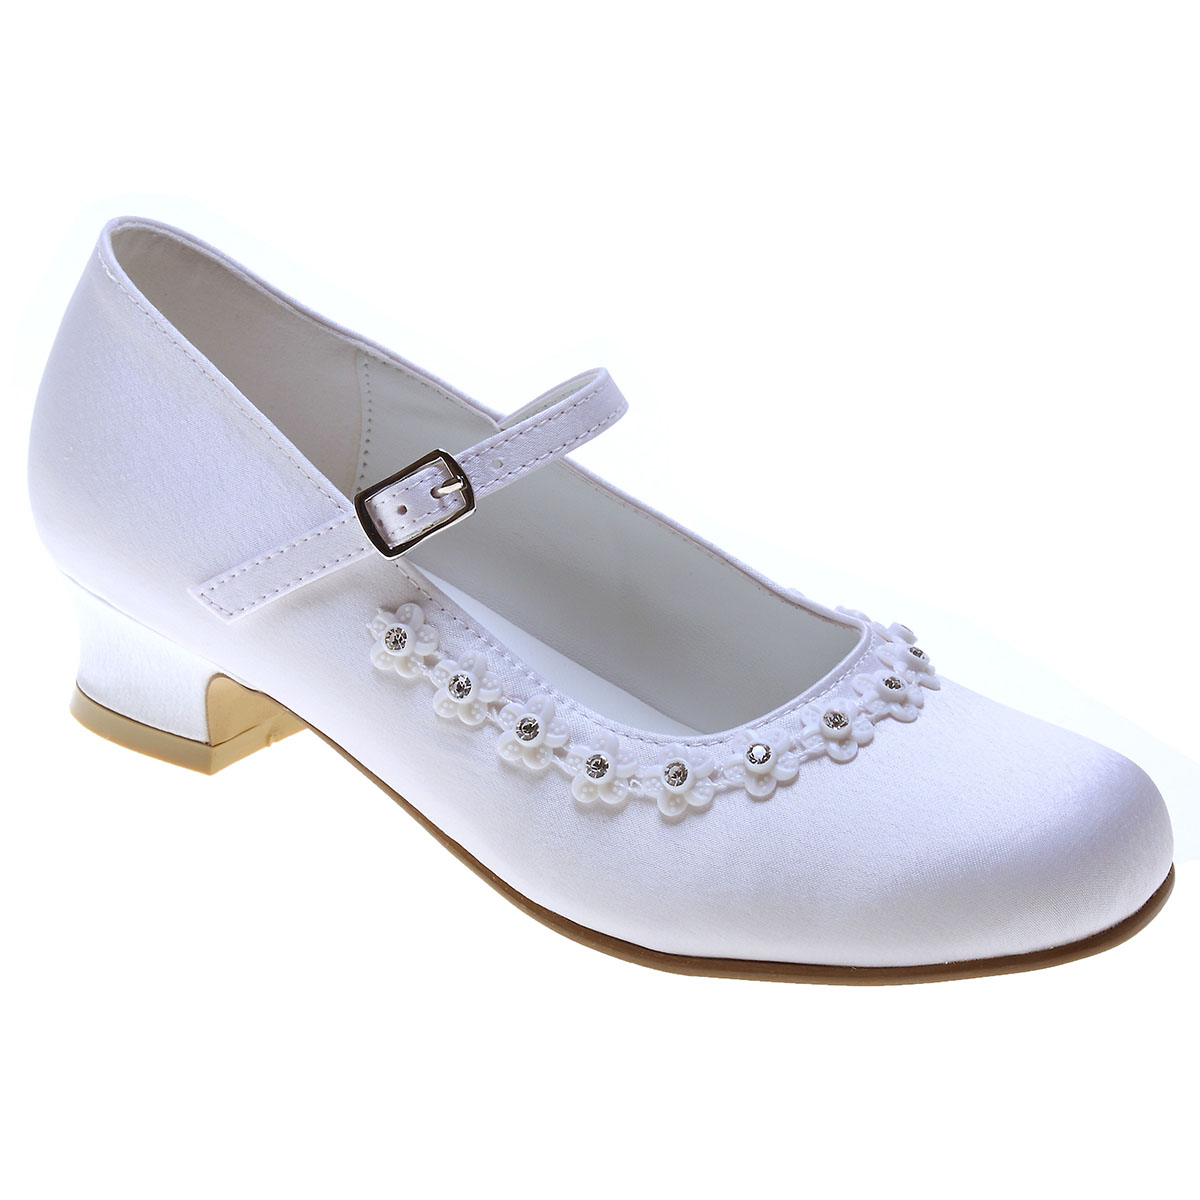 Girls White Satin Shoes With a Rim of Diamantes For First